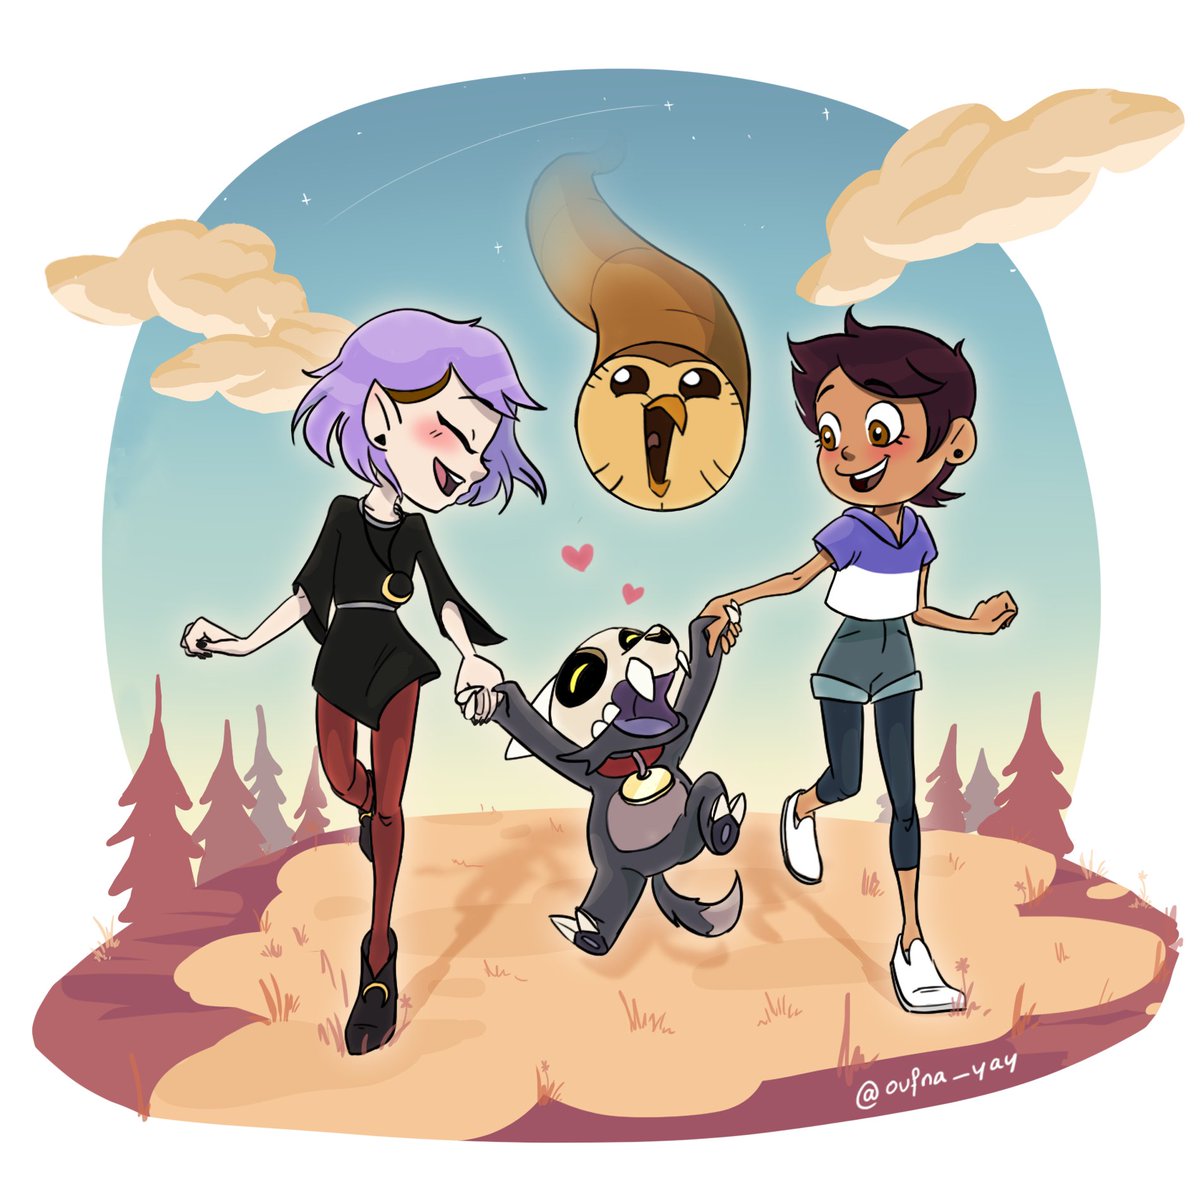 Very happy baby King and his favorite lesbeans
💜🖤🤎
...& a Hooty from heaven

.
#Lumity #Luz #Amity #King #Hooty #TOH #TOHSPOILERS  #Luznoceda #AmityBlight  #hootytoh #kingtoh #WLW  #LGBT #LGBTQ #girlslove #TheOwlHouse  #fanart  #theowlhousefanart #tohfanart